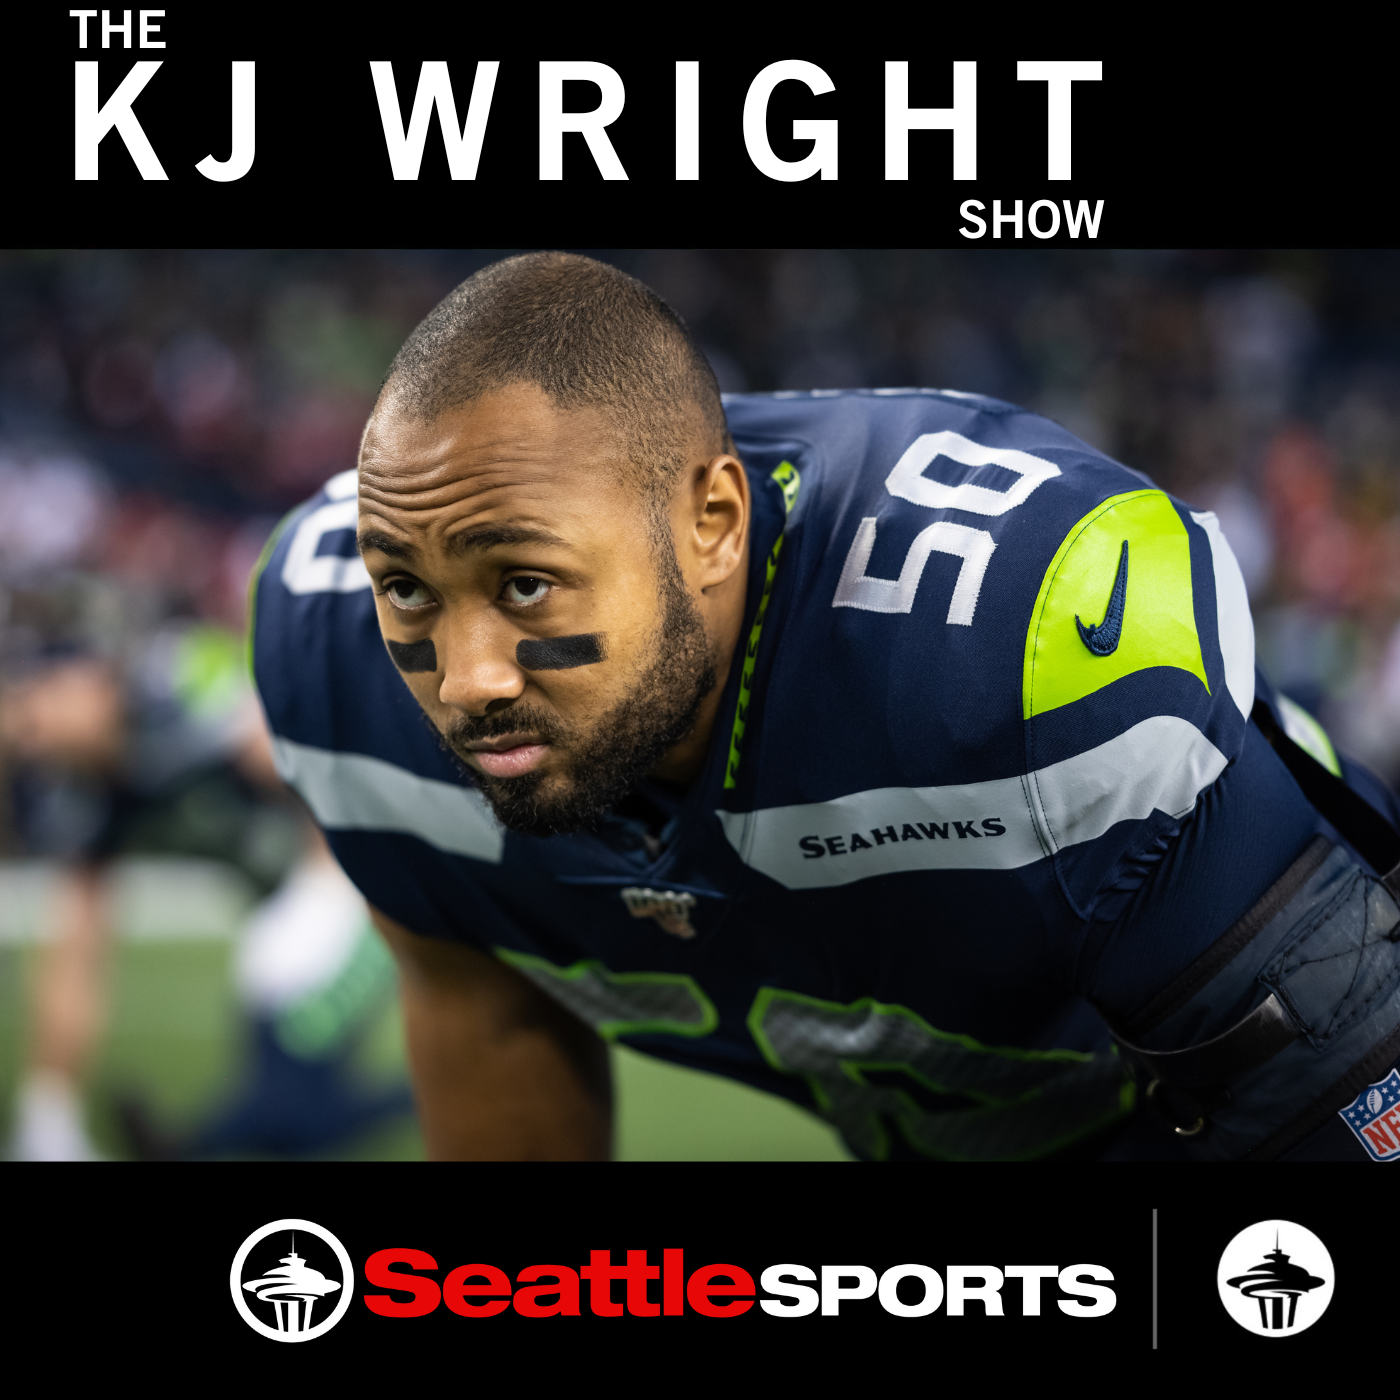 The KJ Wright Show - Where are the Seahawks in their pursuit of another Championship?